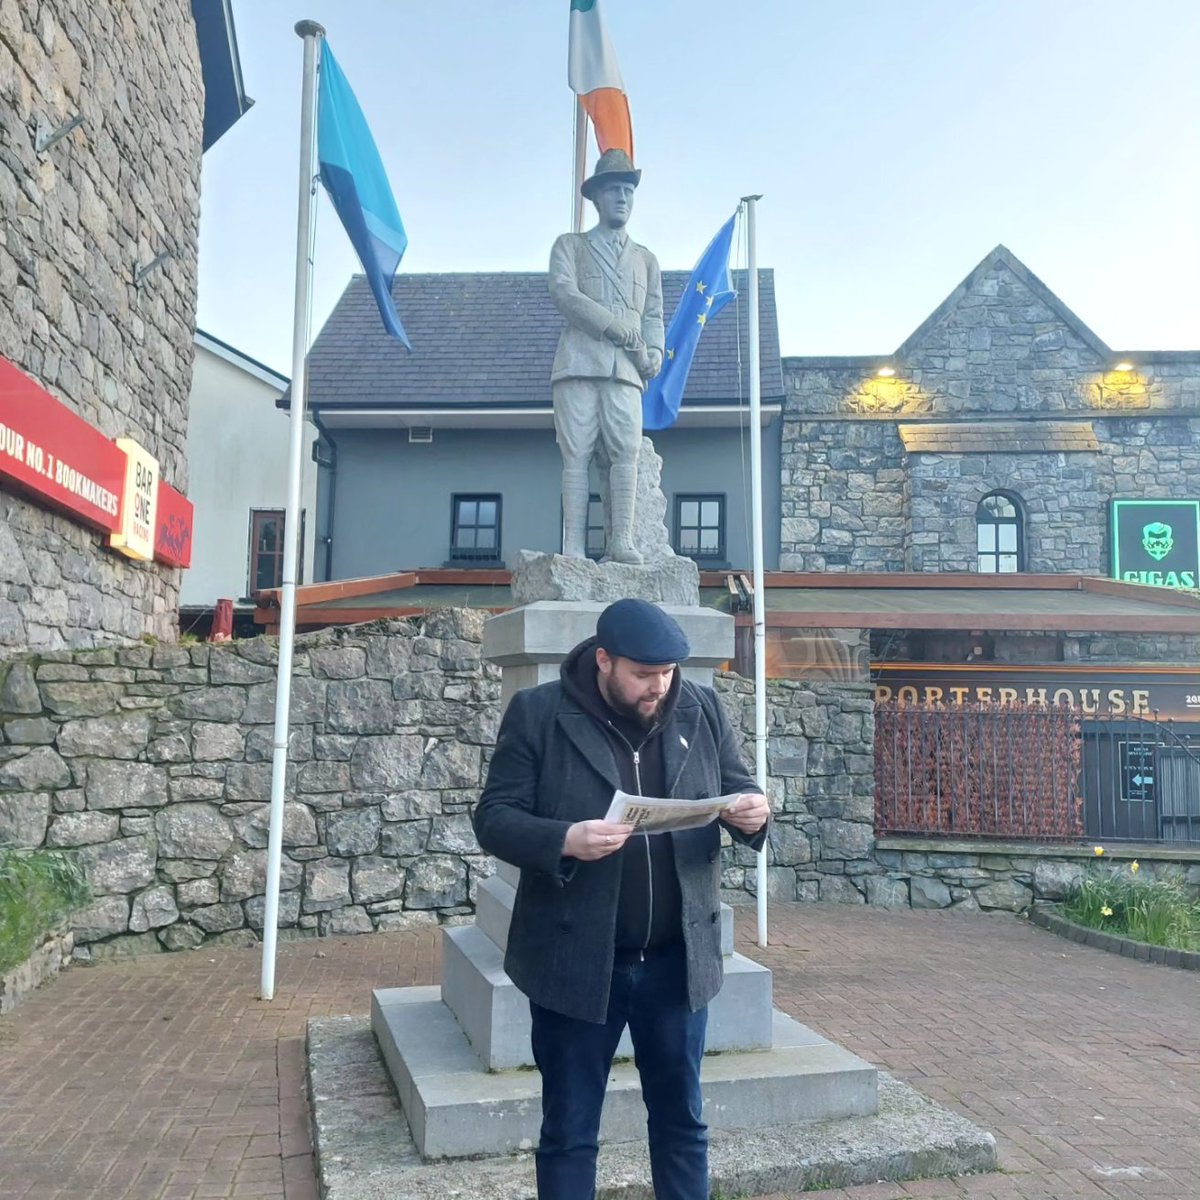 Beginning this years Easter Commemorations at the Joe Howley Monument in Oranmore this evening 🇮🇪